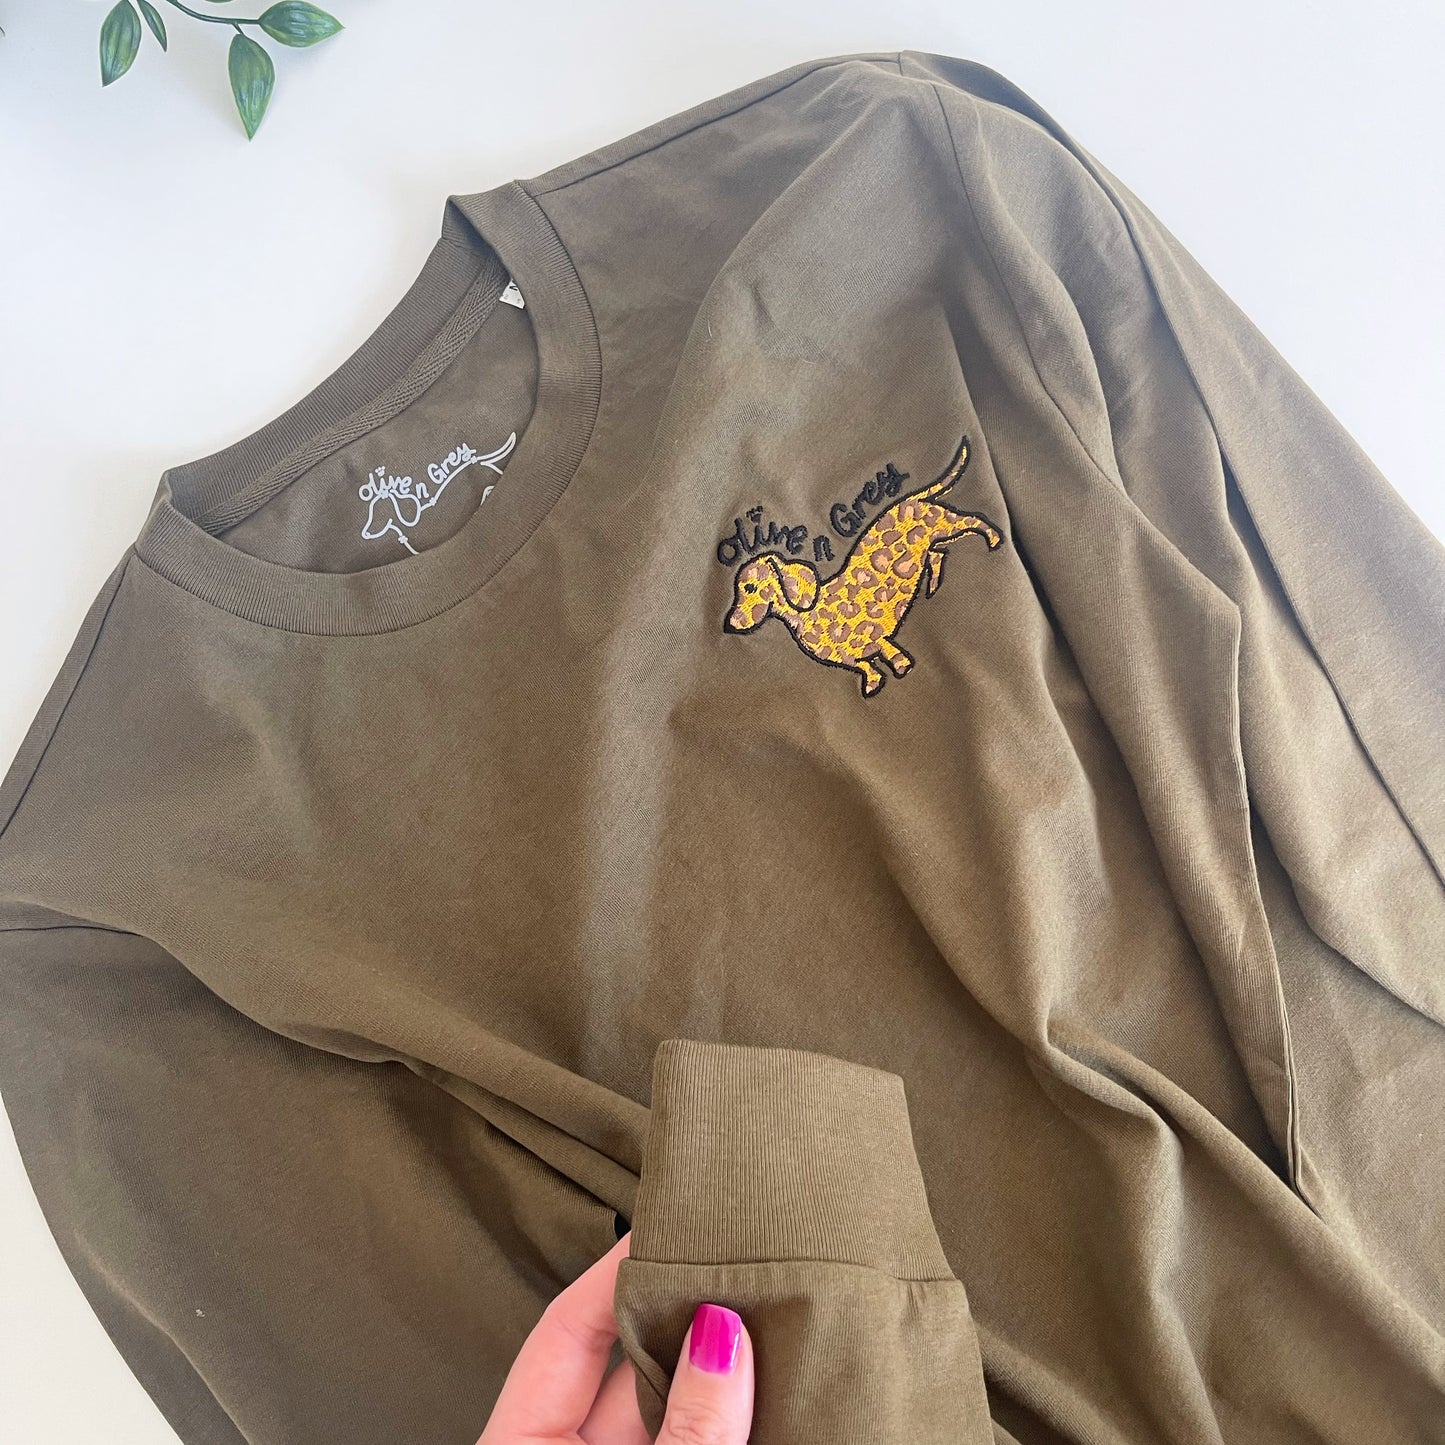 Embroidered Olive n Grey Leopard Long Sleeve T-Shirt